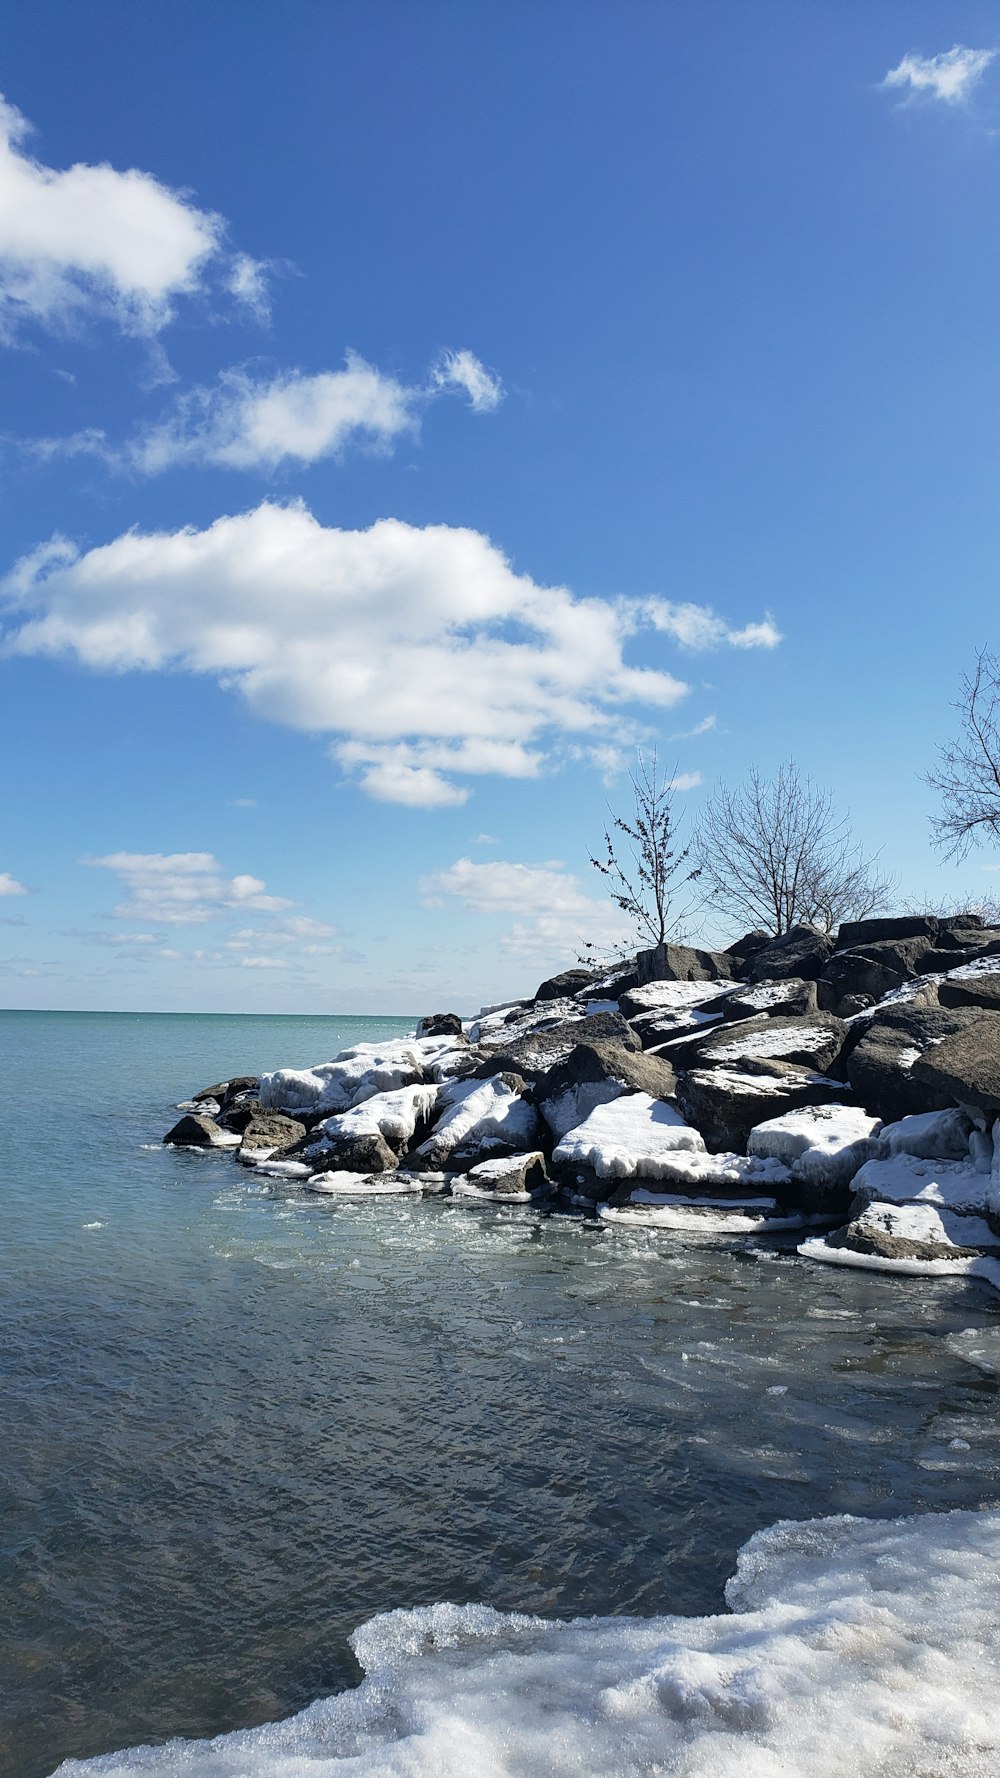 a body of water surrounded by snow covered rocks